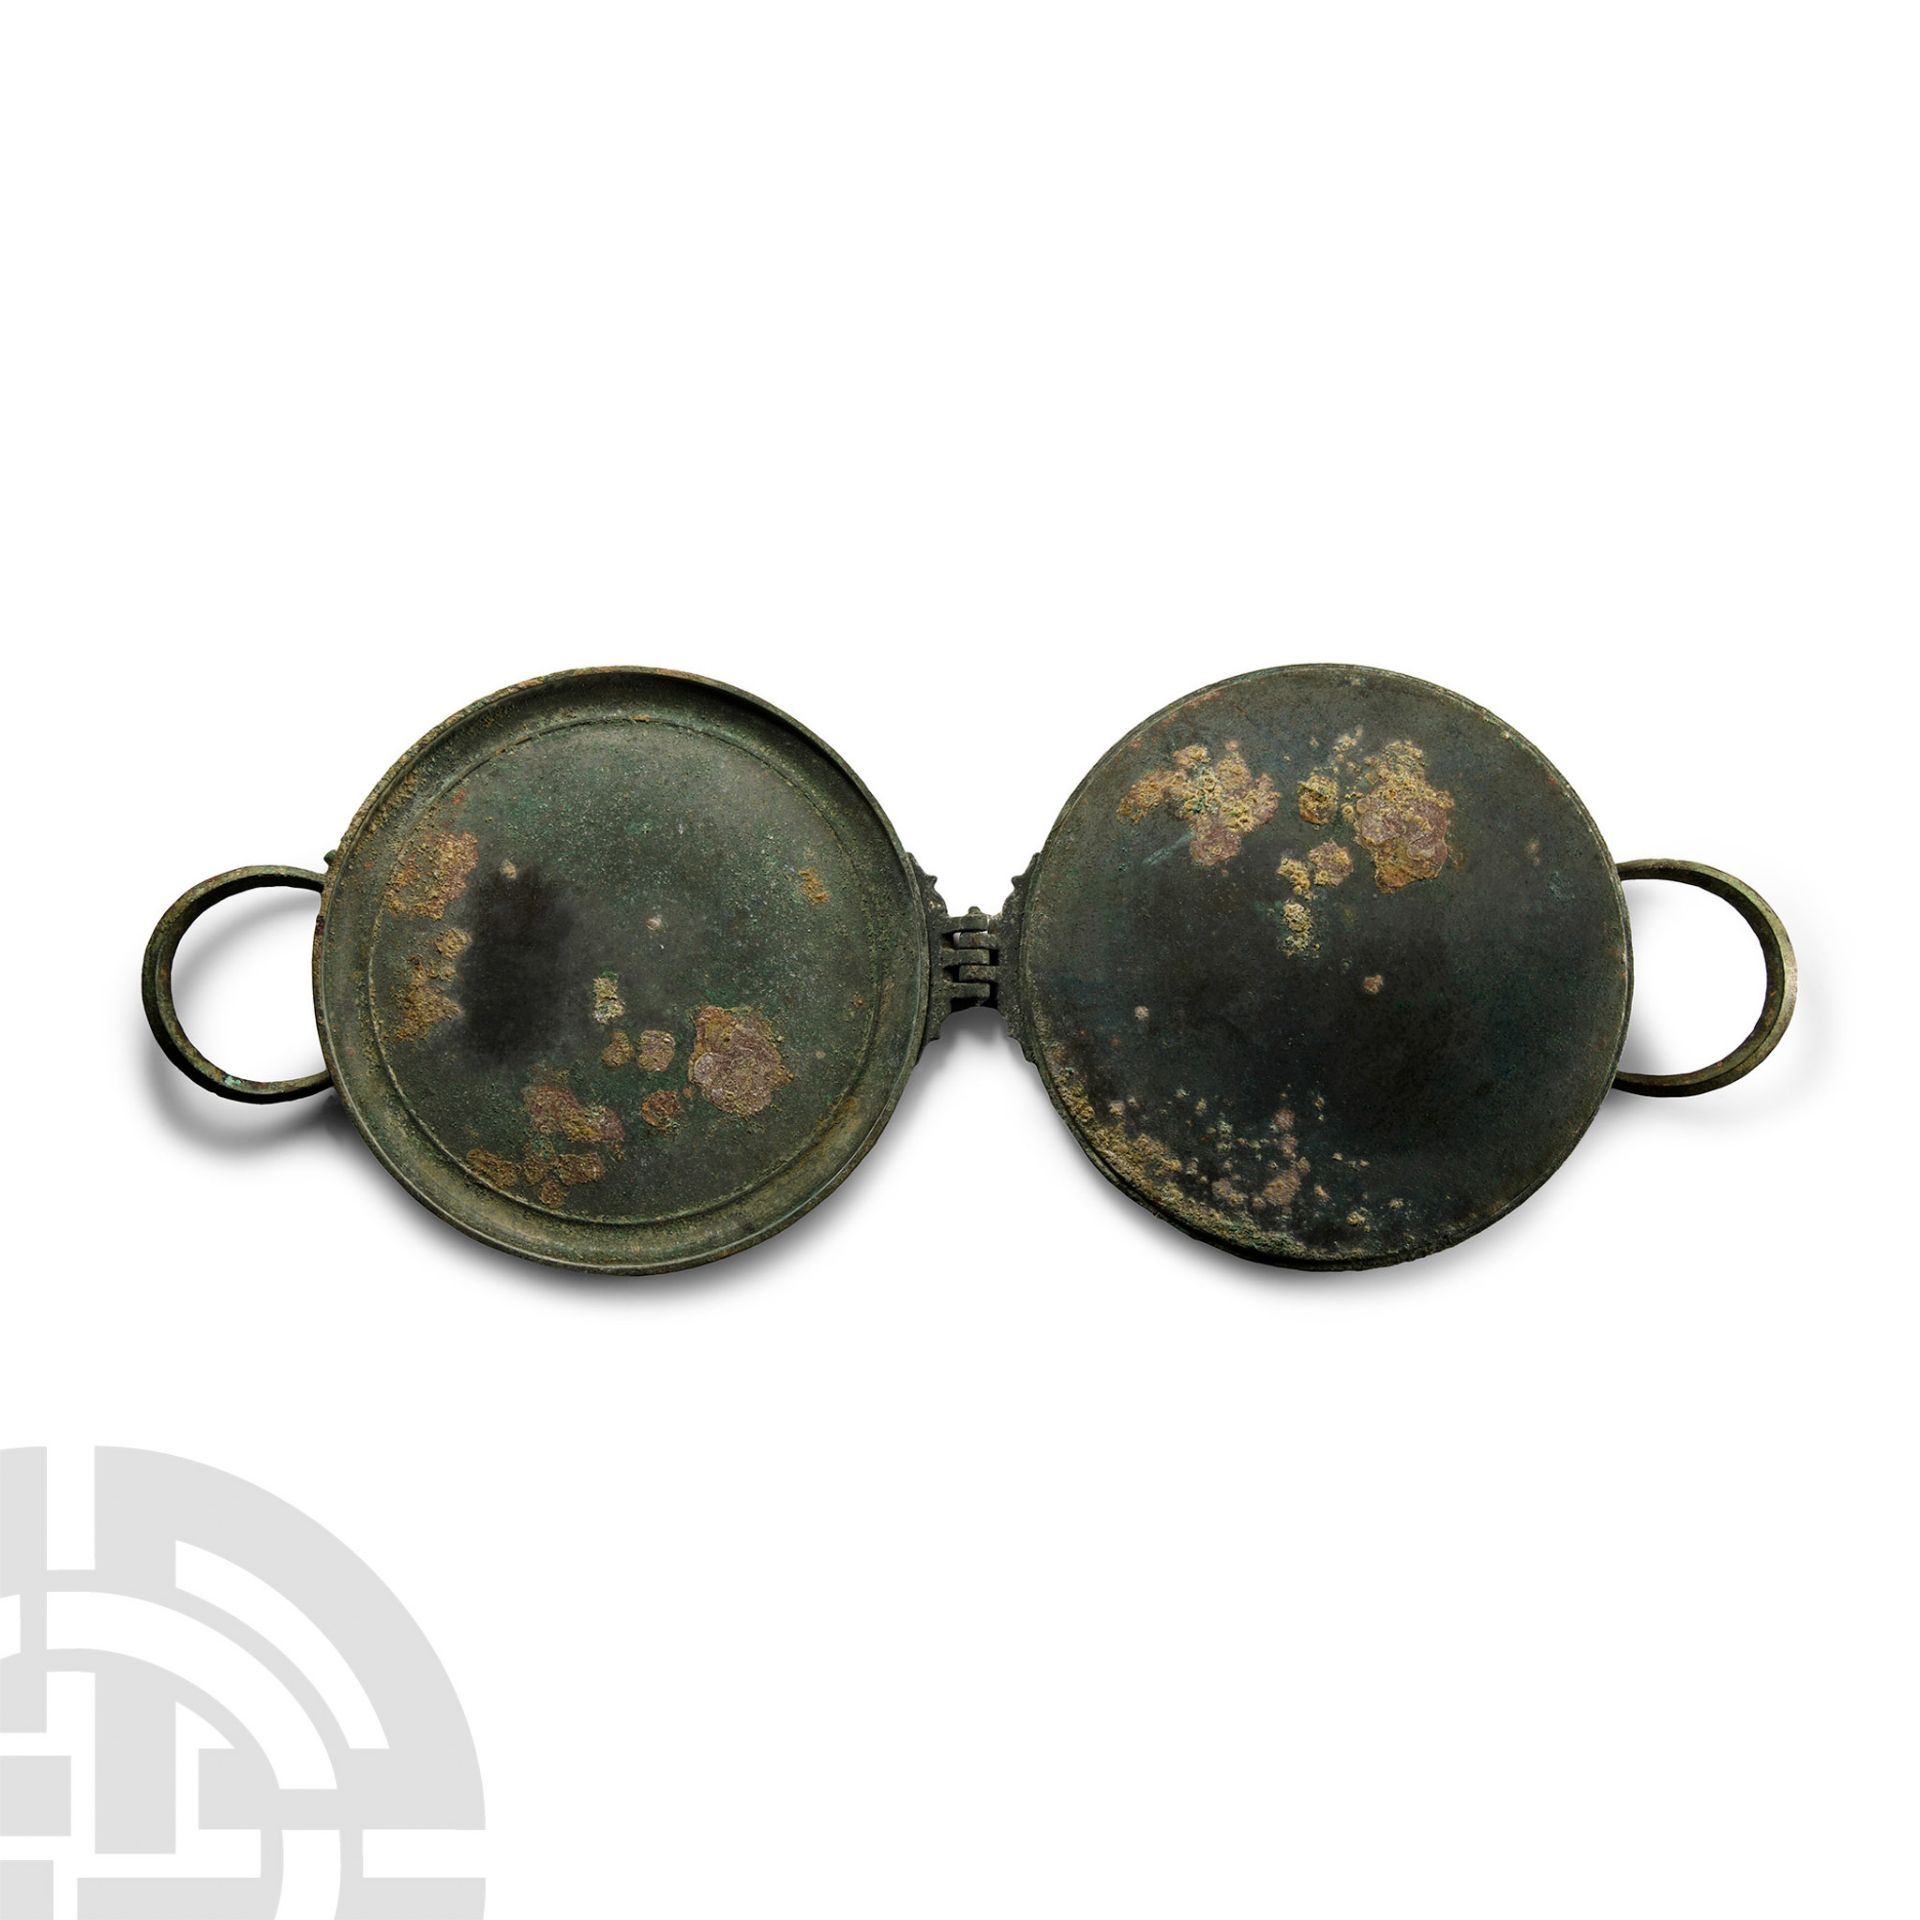 Hellenistic Bronze Folding Travelling Mirror - Image 3 of 3